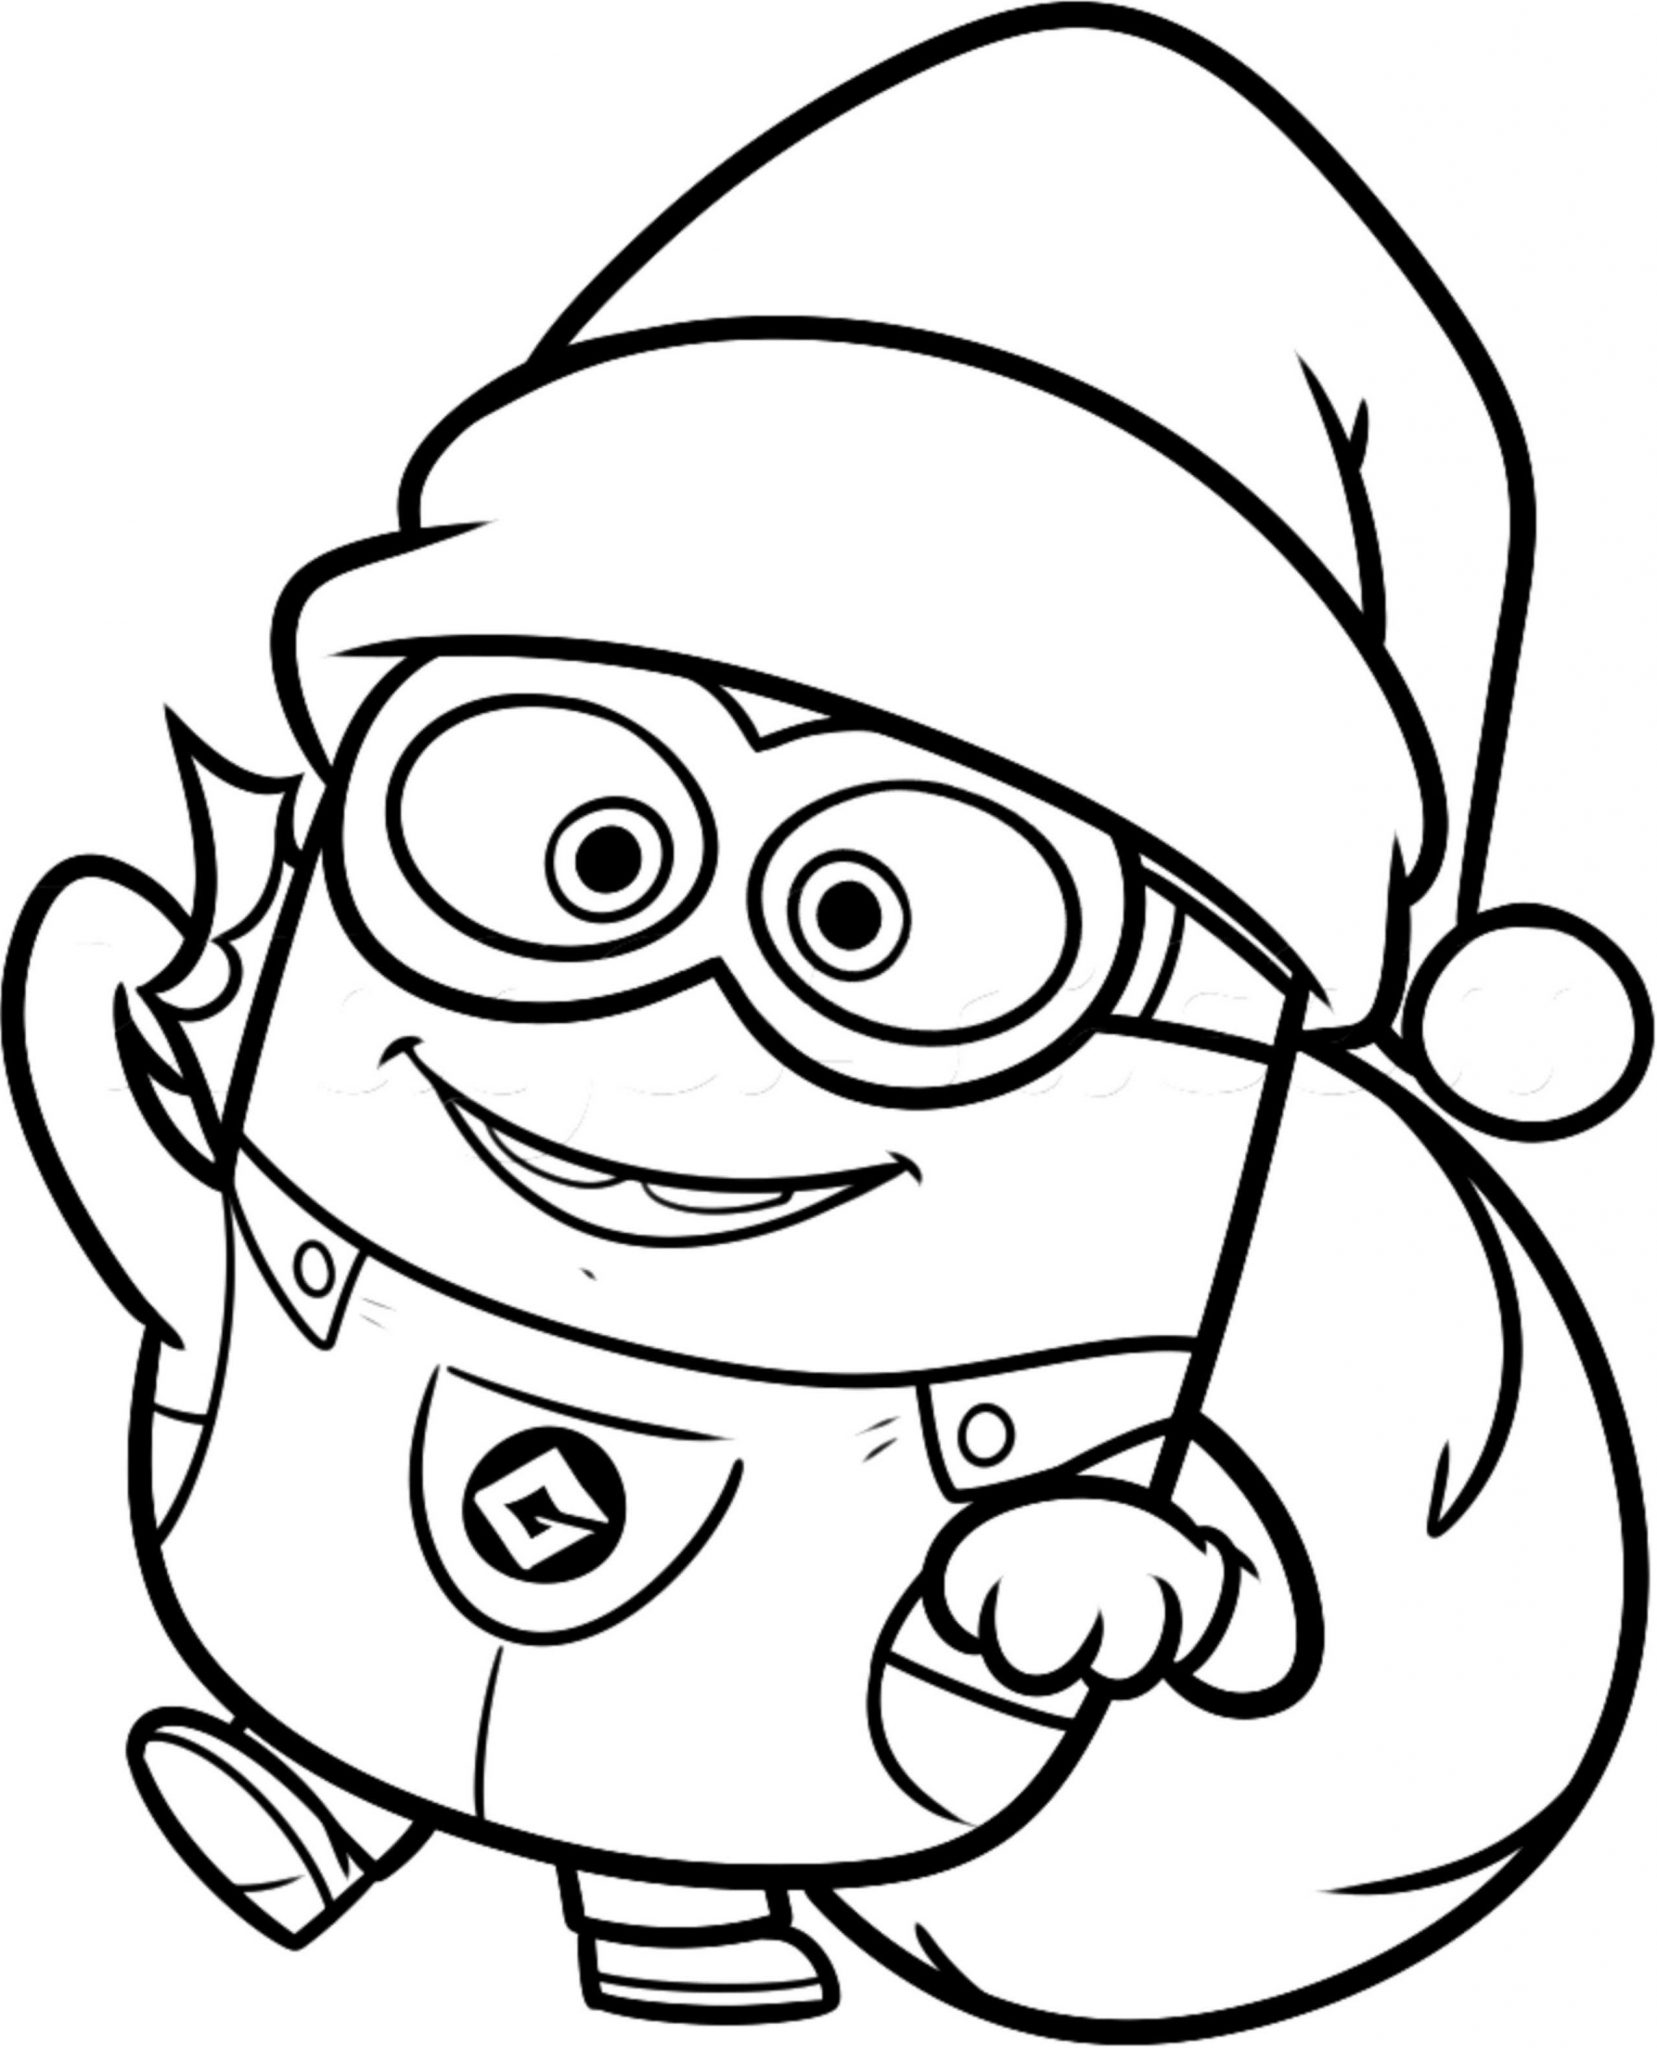 Coloring Pages Minions / 35 Free Minions Coloring Pages Printable